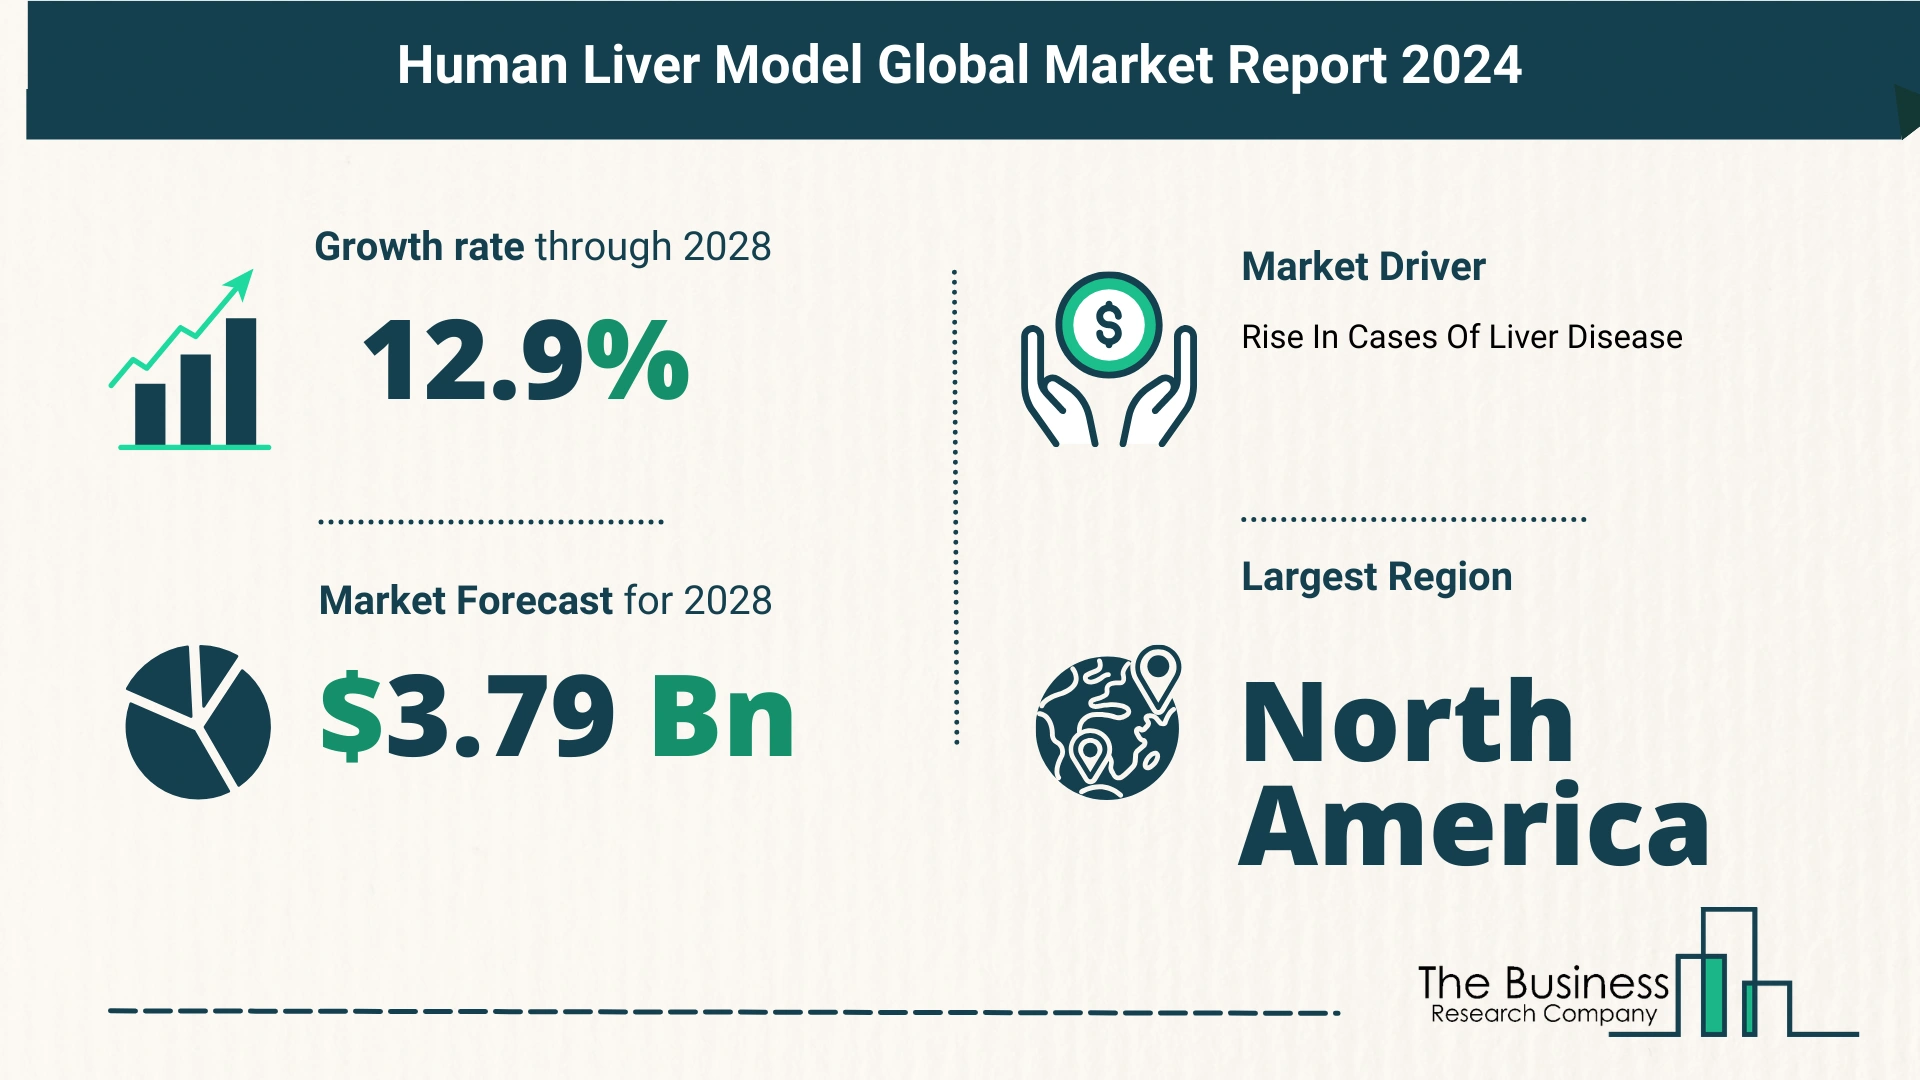 Top 5 Insights From The Human Liver Model Market Report 2024